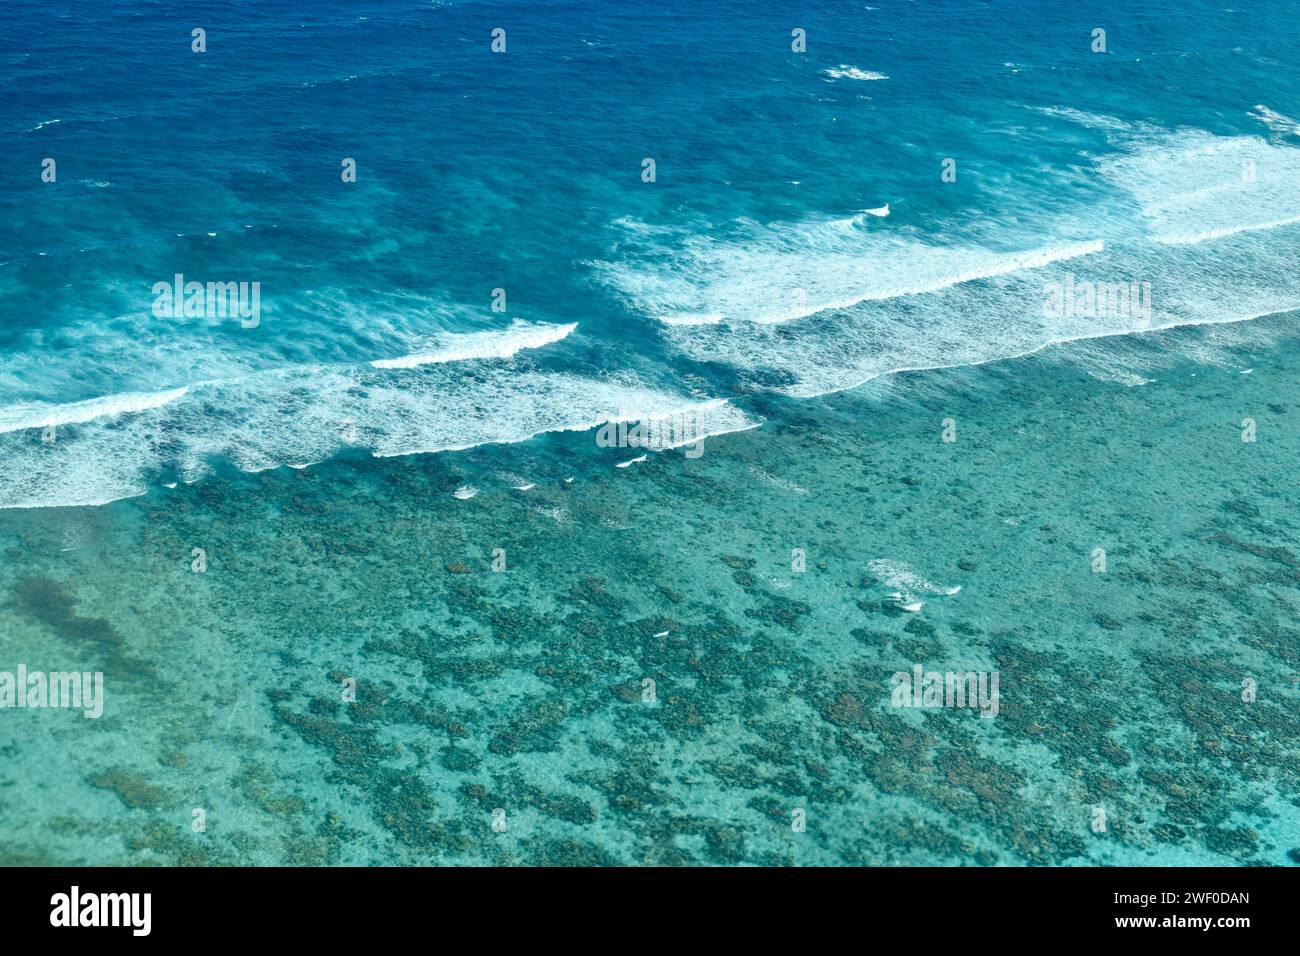 An aerial view of the Belize Barrier Reef, which is part of the ...